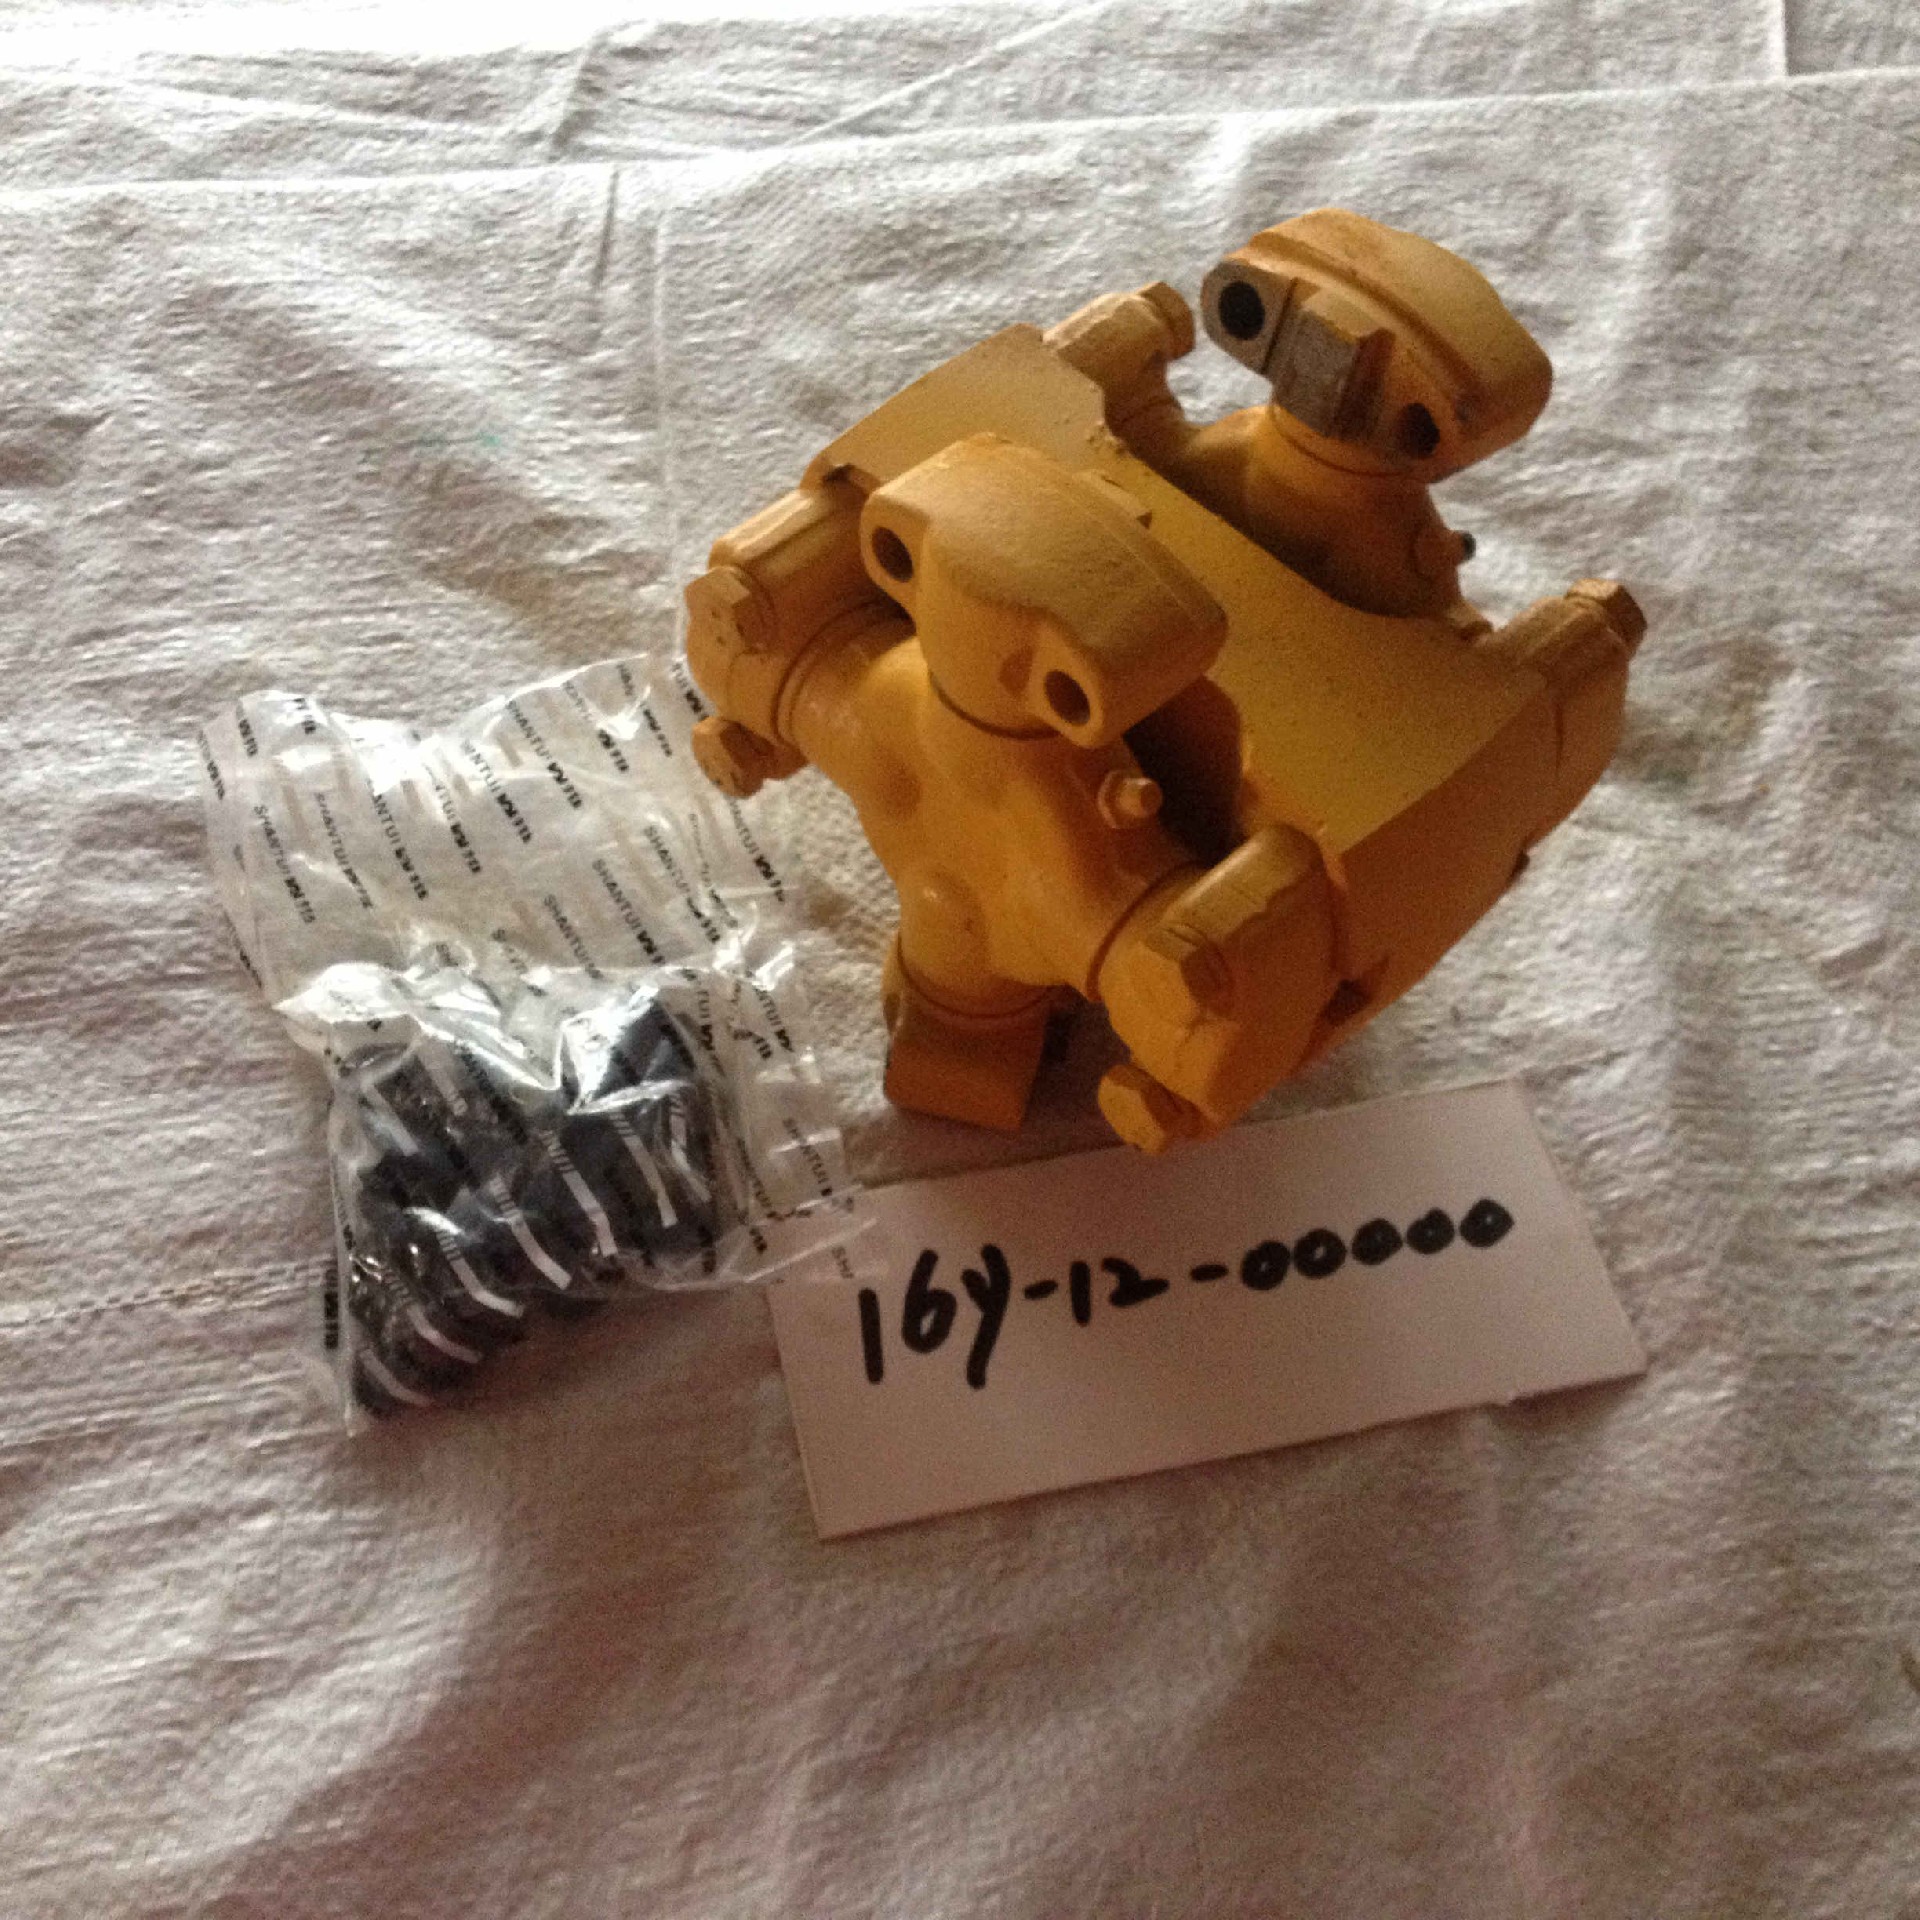 16Y-12-00000 (1)		Universal joint assembly